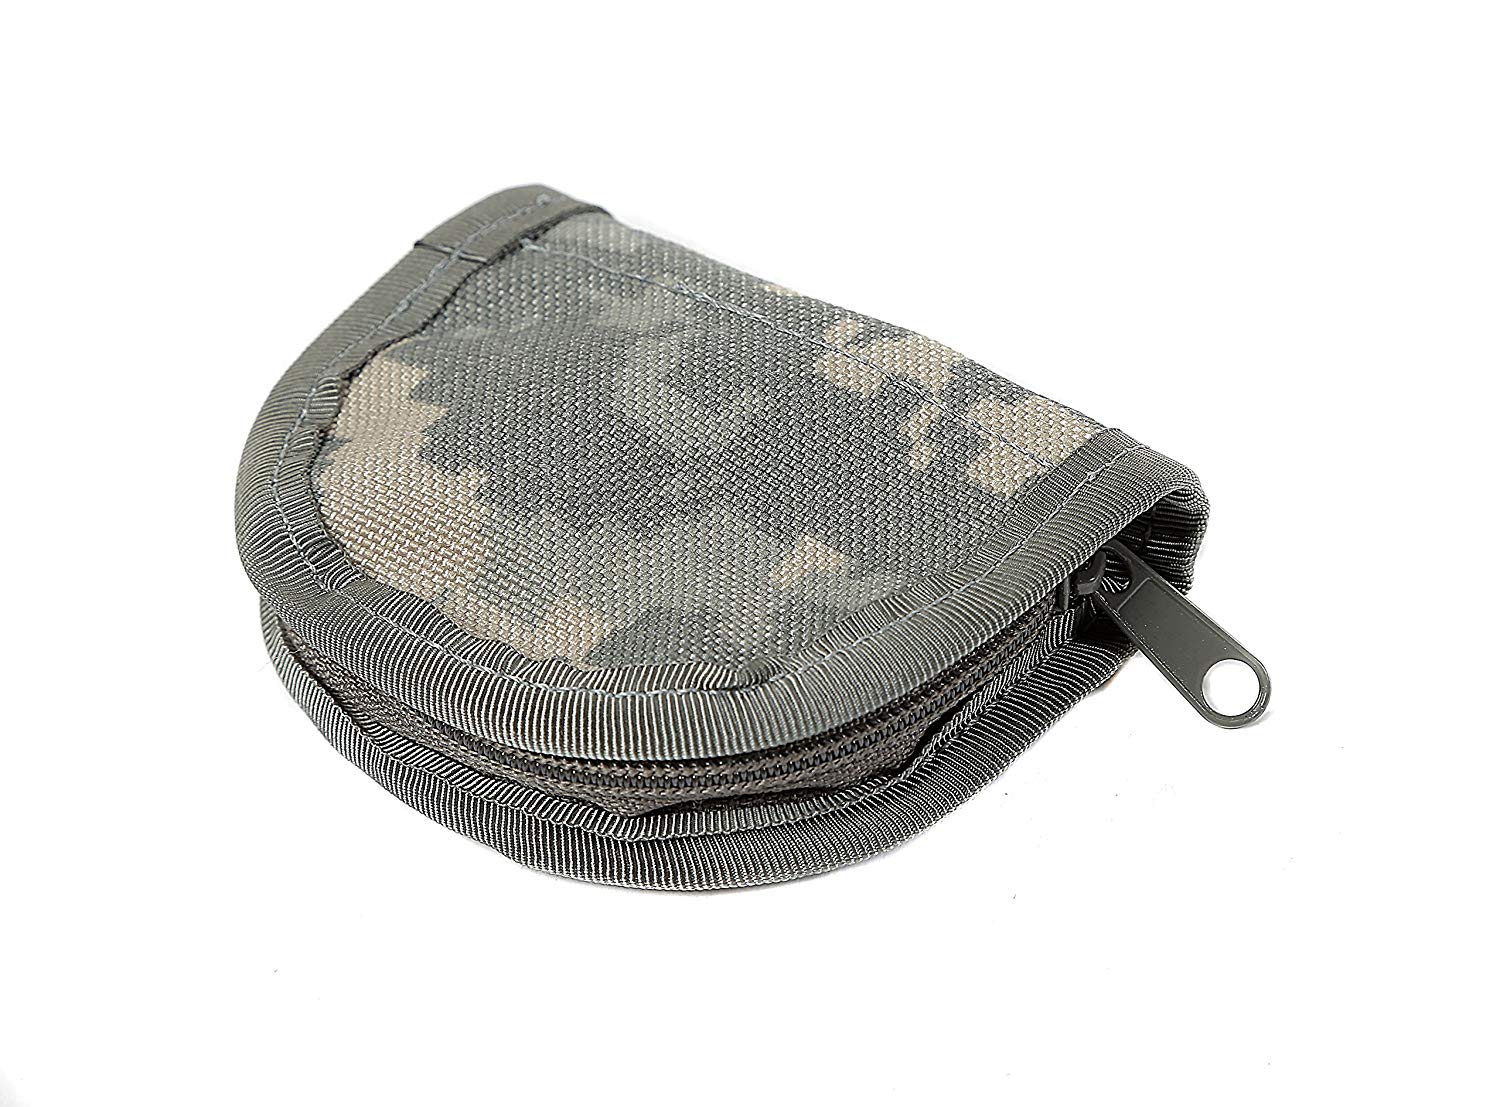 Raine Military Sewing Kit with Scissors - Travel Sewing Kit